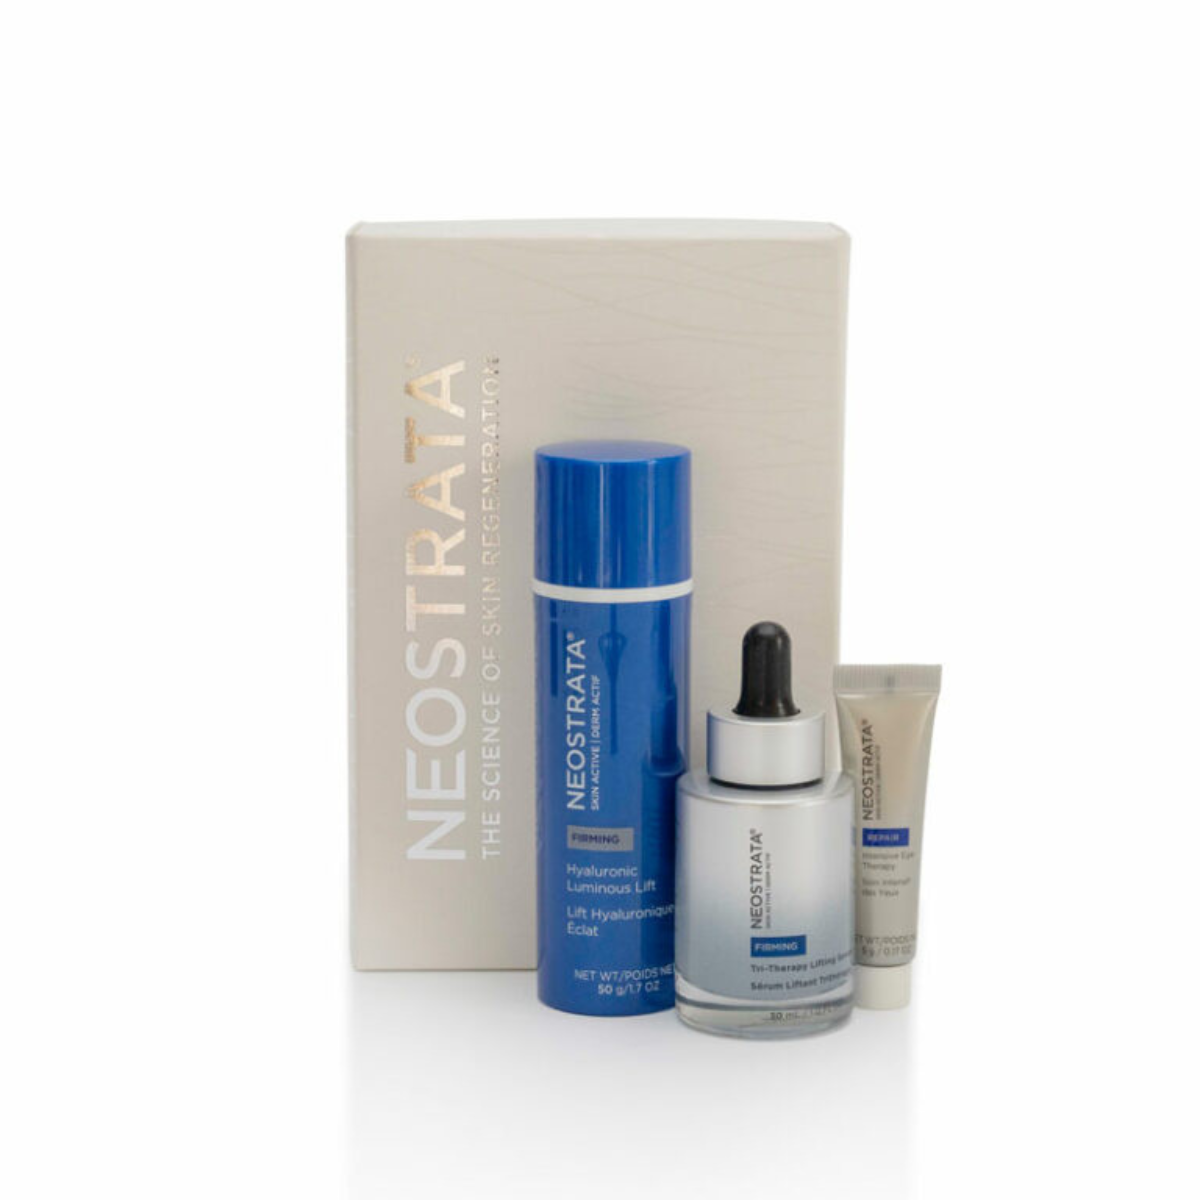 Neostrata Antiaging Collection SAVE 31% with products 